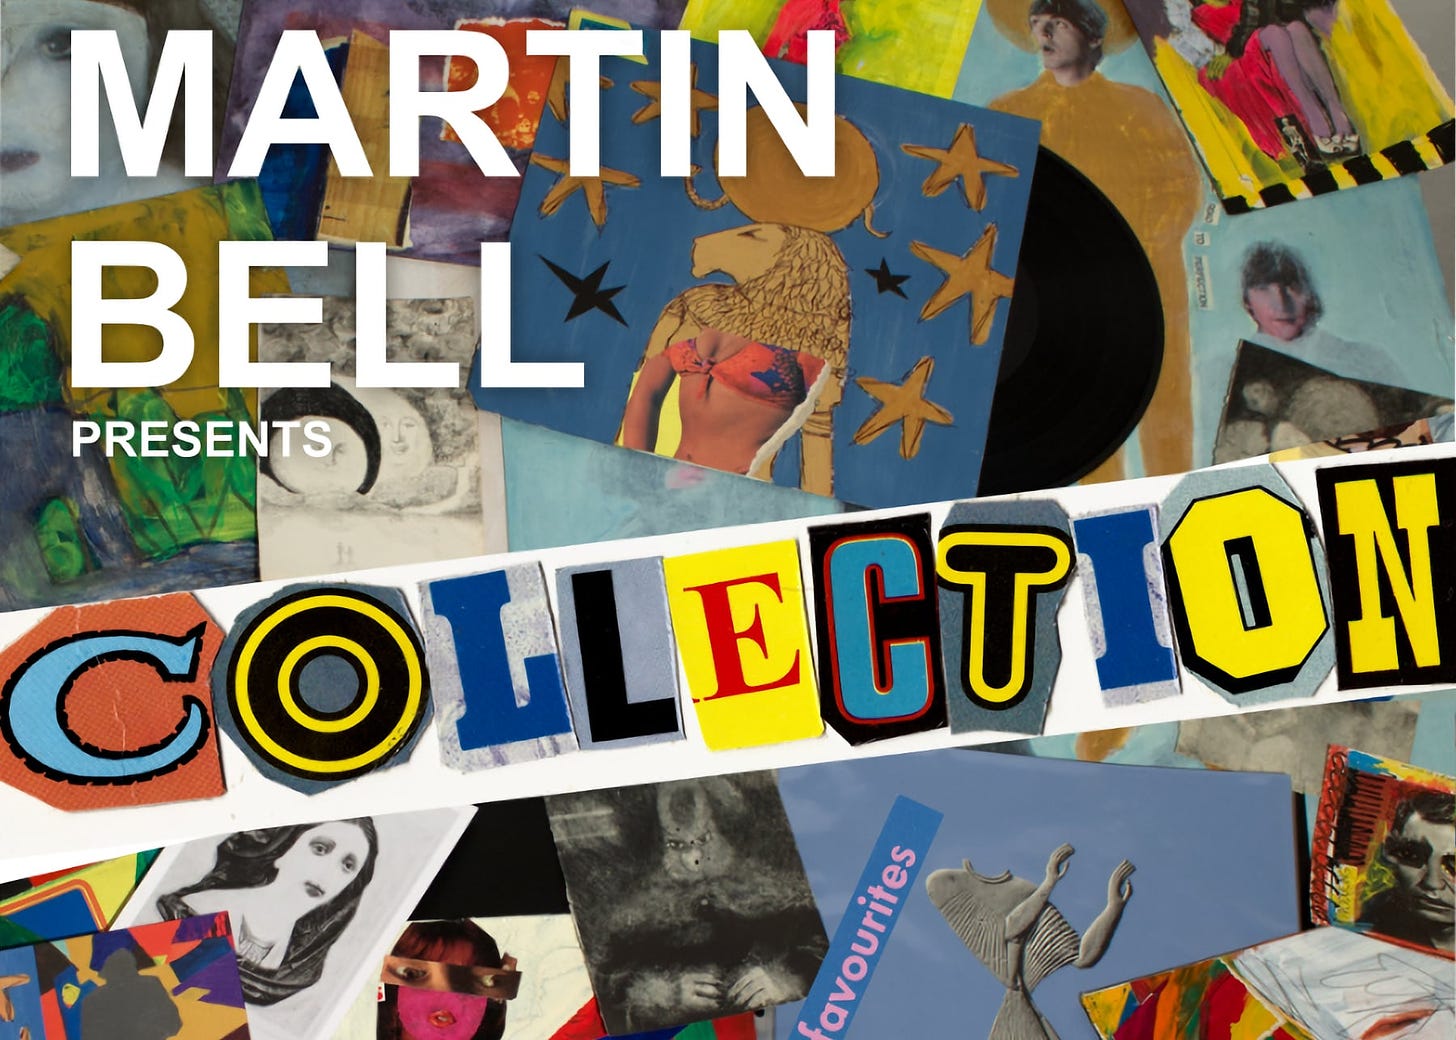 The image is a close-up of a collage-style promotional graphic for an art exhibition. It prominently features the text 'MARTIN BELL PRESENTS COLLECTION' in bold, cut-out letters of varying fonts and colors against a background of assorted artistic images. These images include abstract paintings, figurative drawings, and what appear to be record covers, suggesting a diverse and eclectic range of art styles. The word 'COLLECTION' is central and particularly striking, with each letter a different design, emphasizing the variety of the collection on display.